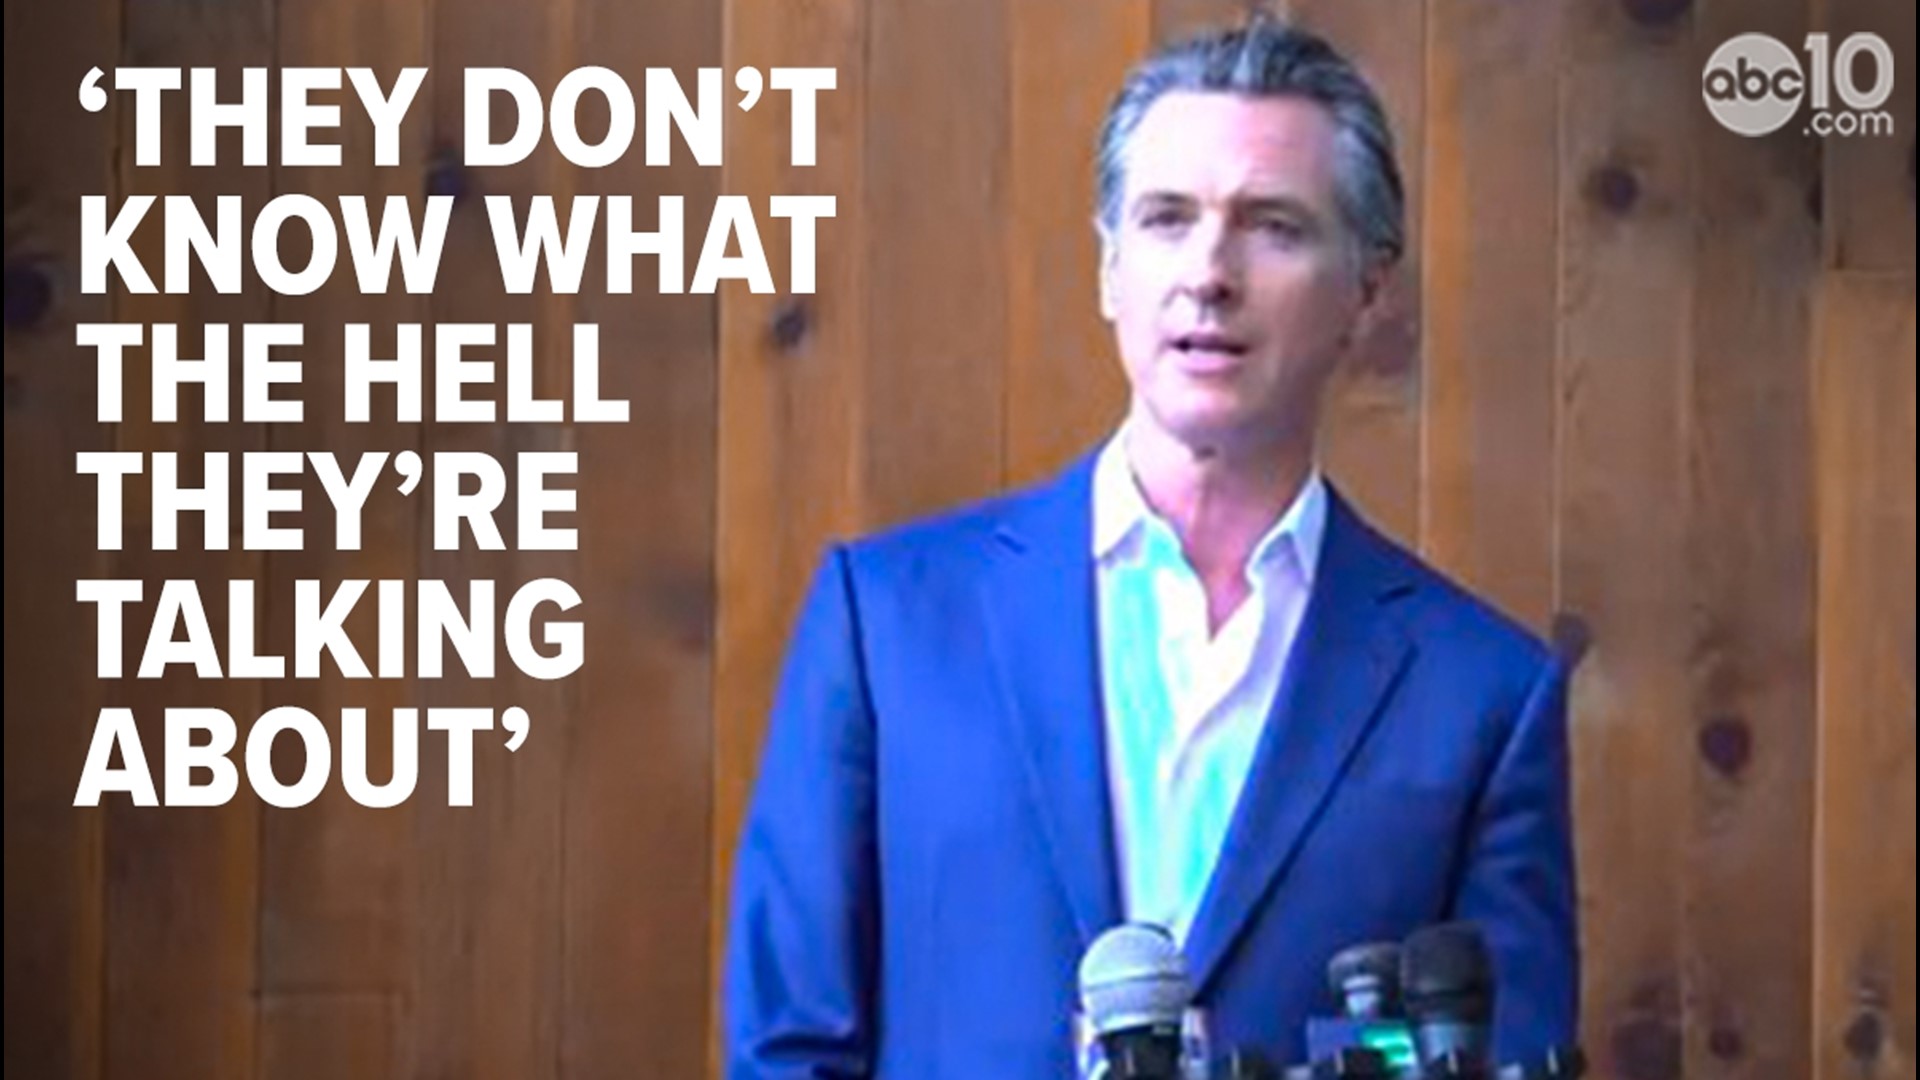 Our political reporter Morgan Rynor asked Gov. Gavin Newsom if environmental policies are behind the gas price hike. Watch how Newsom answered.